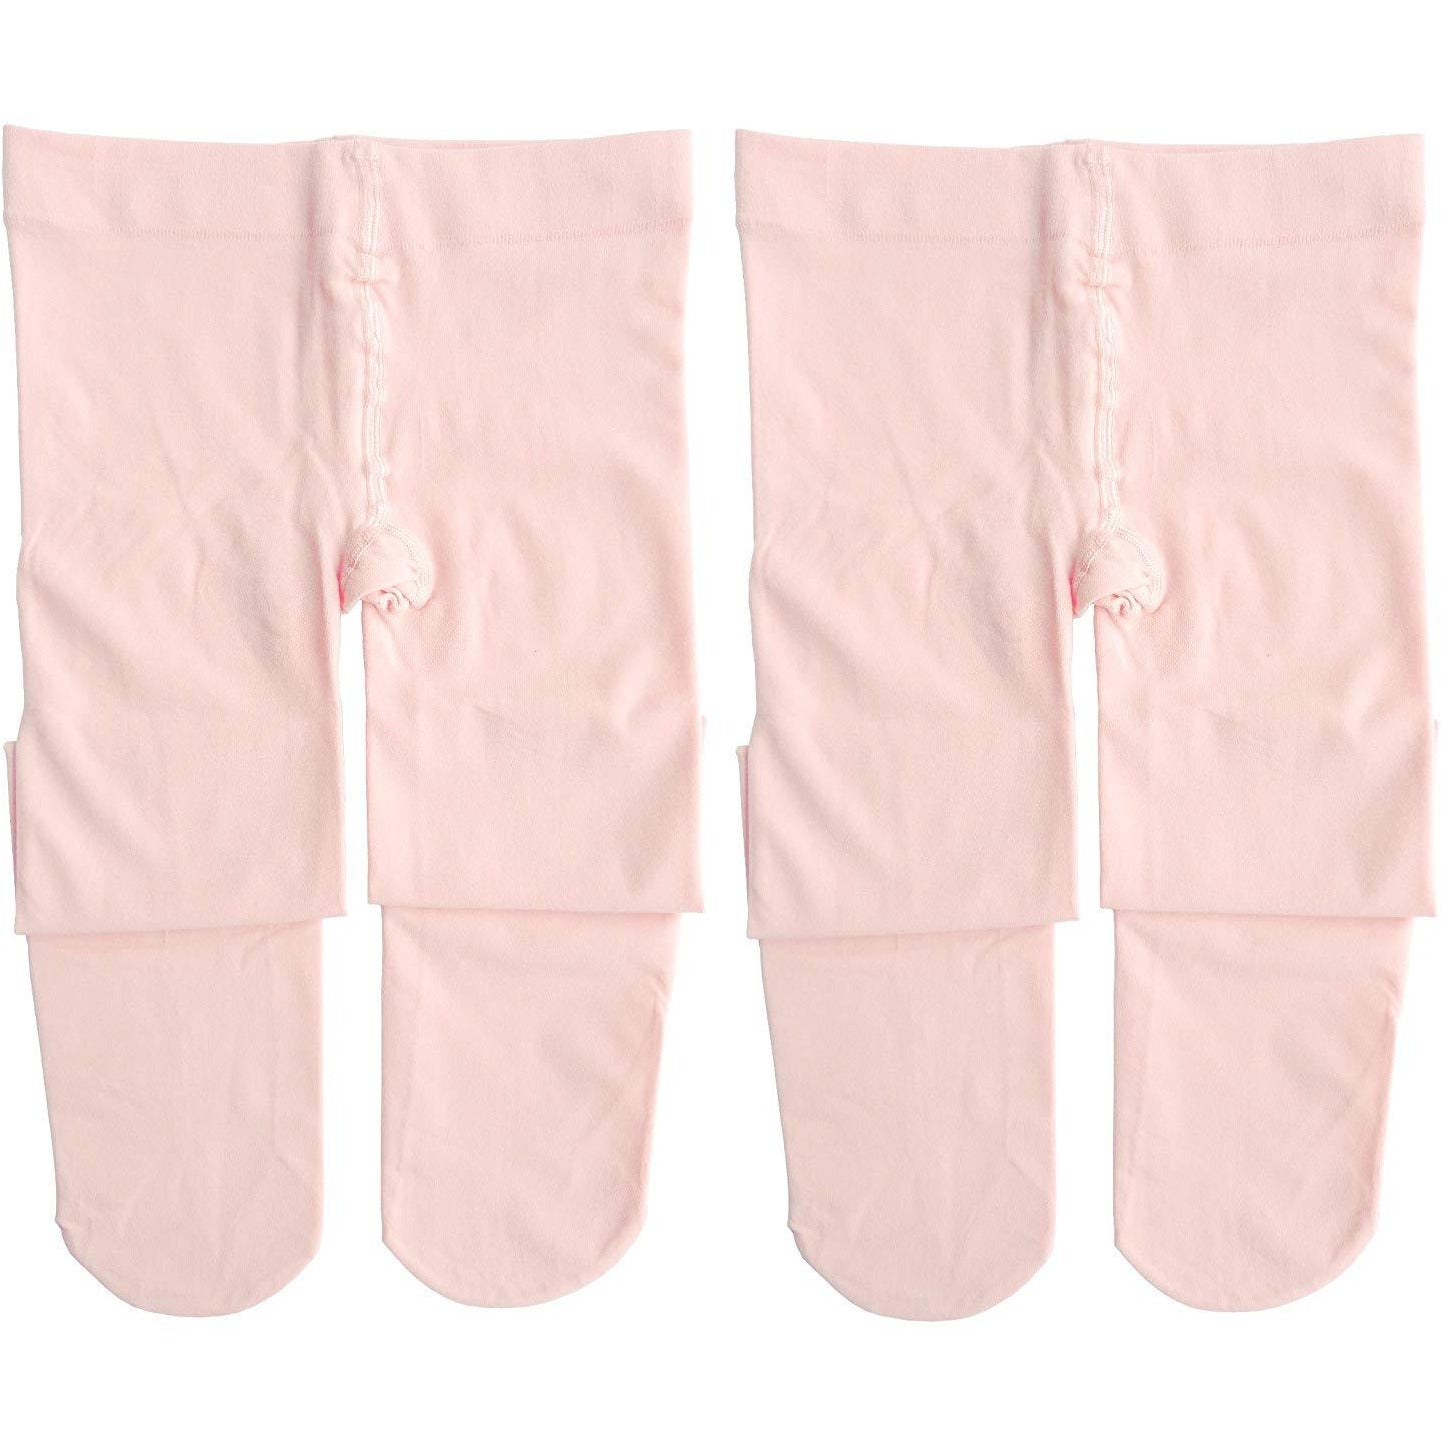 Girls Ballet Dance's Tights Stretchy Leggings Pants Ballet Footed